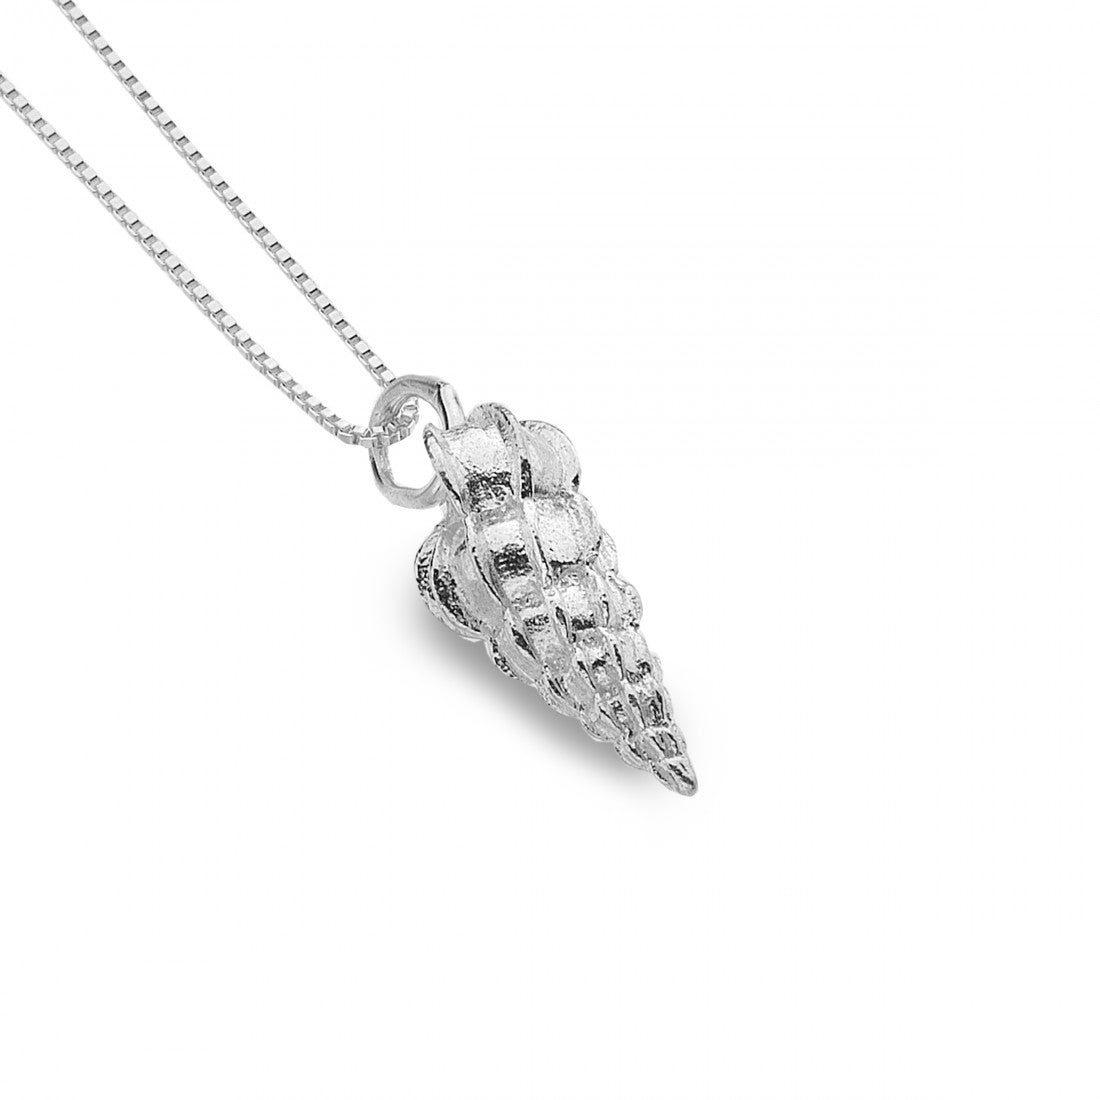 Wentletrap Shell Necklace In Sterling Silver